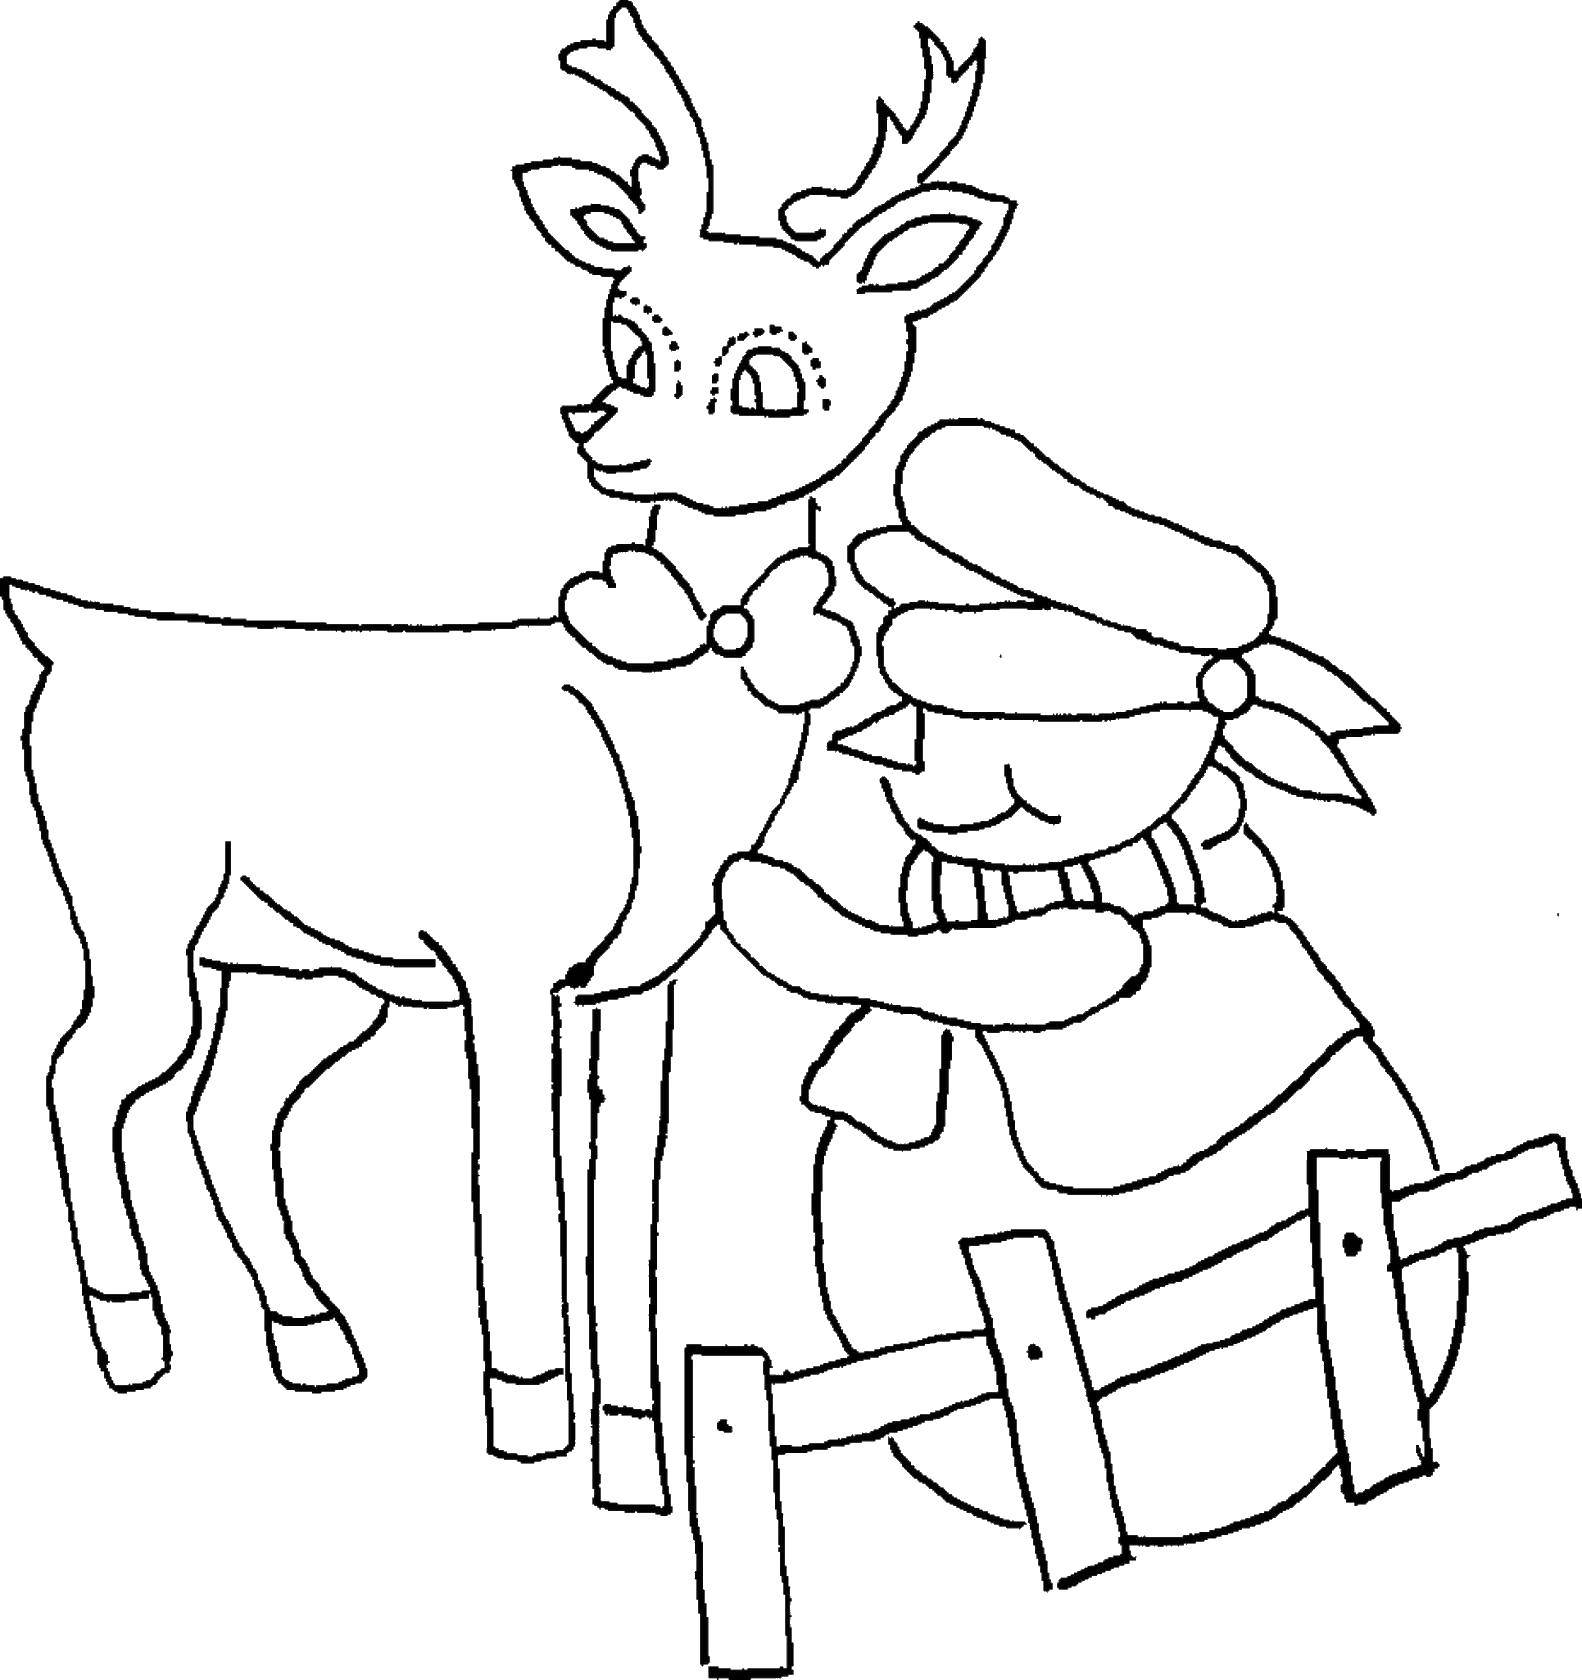 Coloring The deer and the snowman. Category Christmas. Tags:  Snowman, snow, winter.